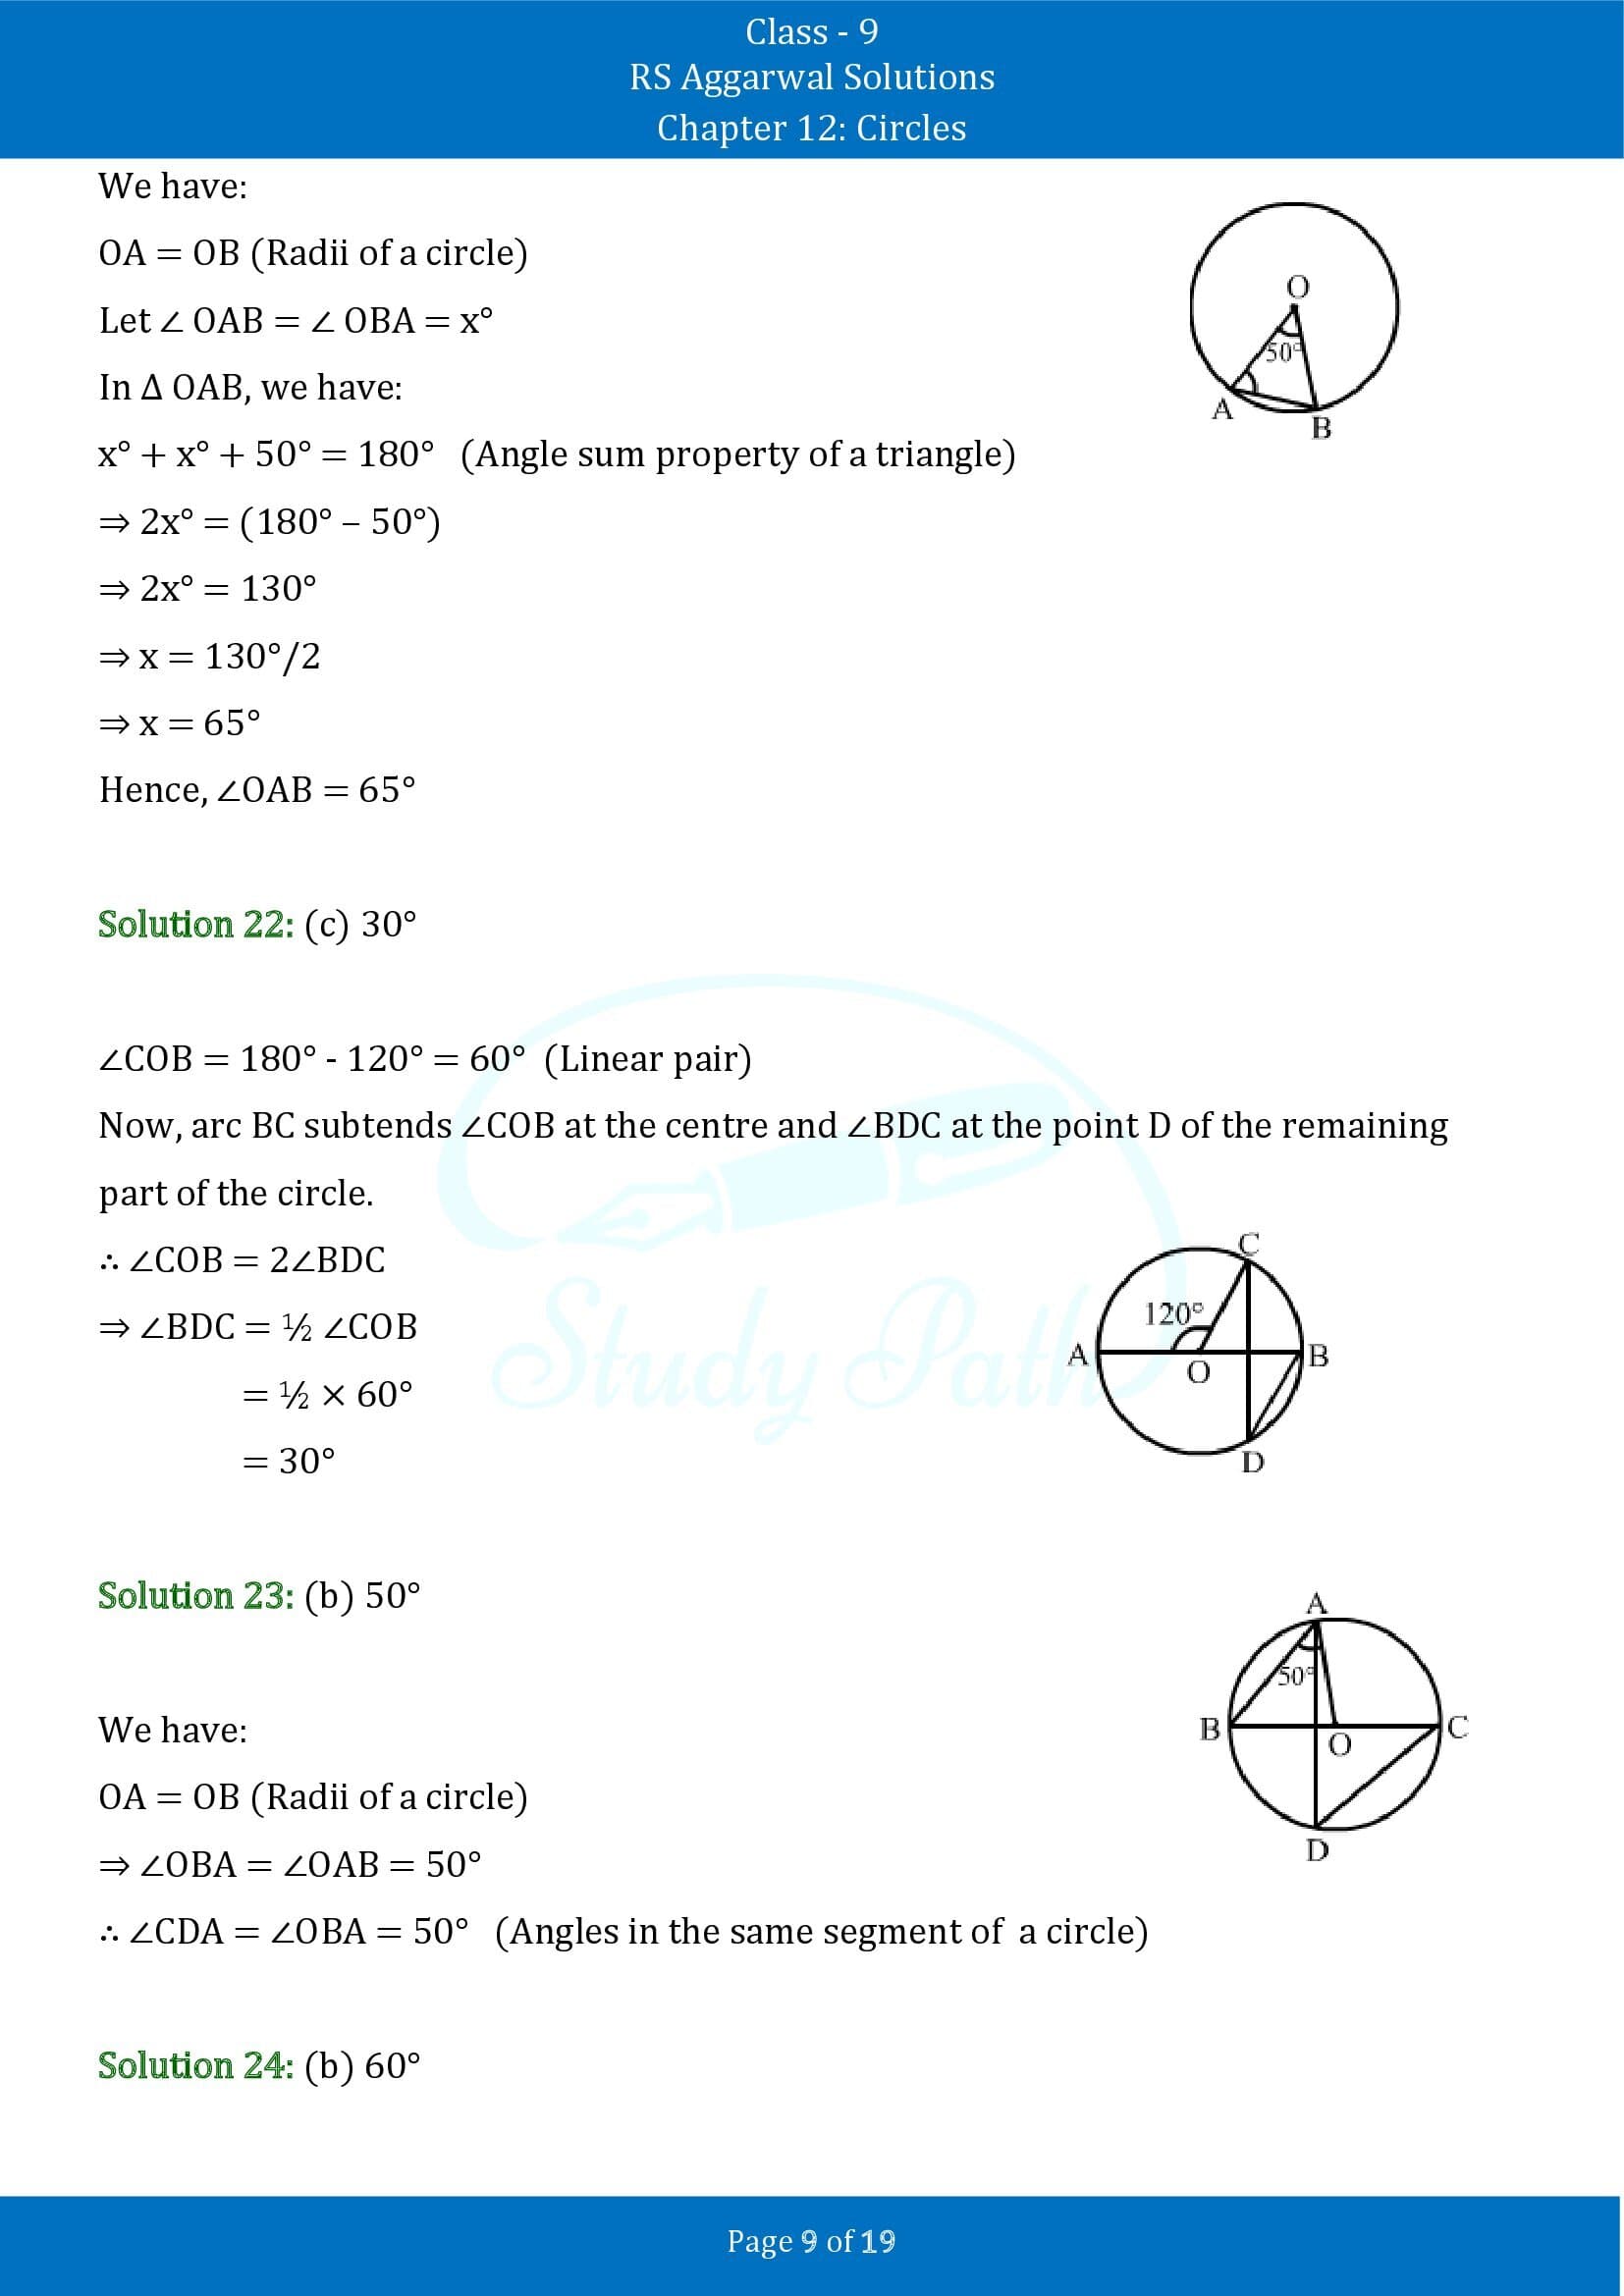 RS Aggarwal Solutions Class 9 Chapter 12 Circles Multiple Choice Questions MCQs 00009